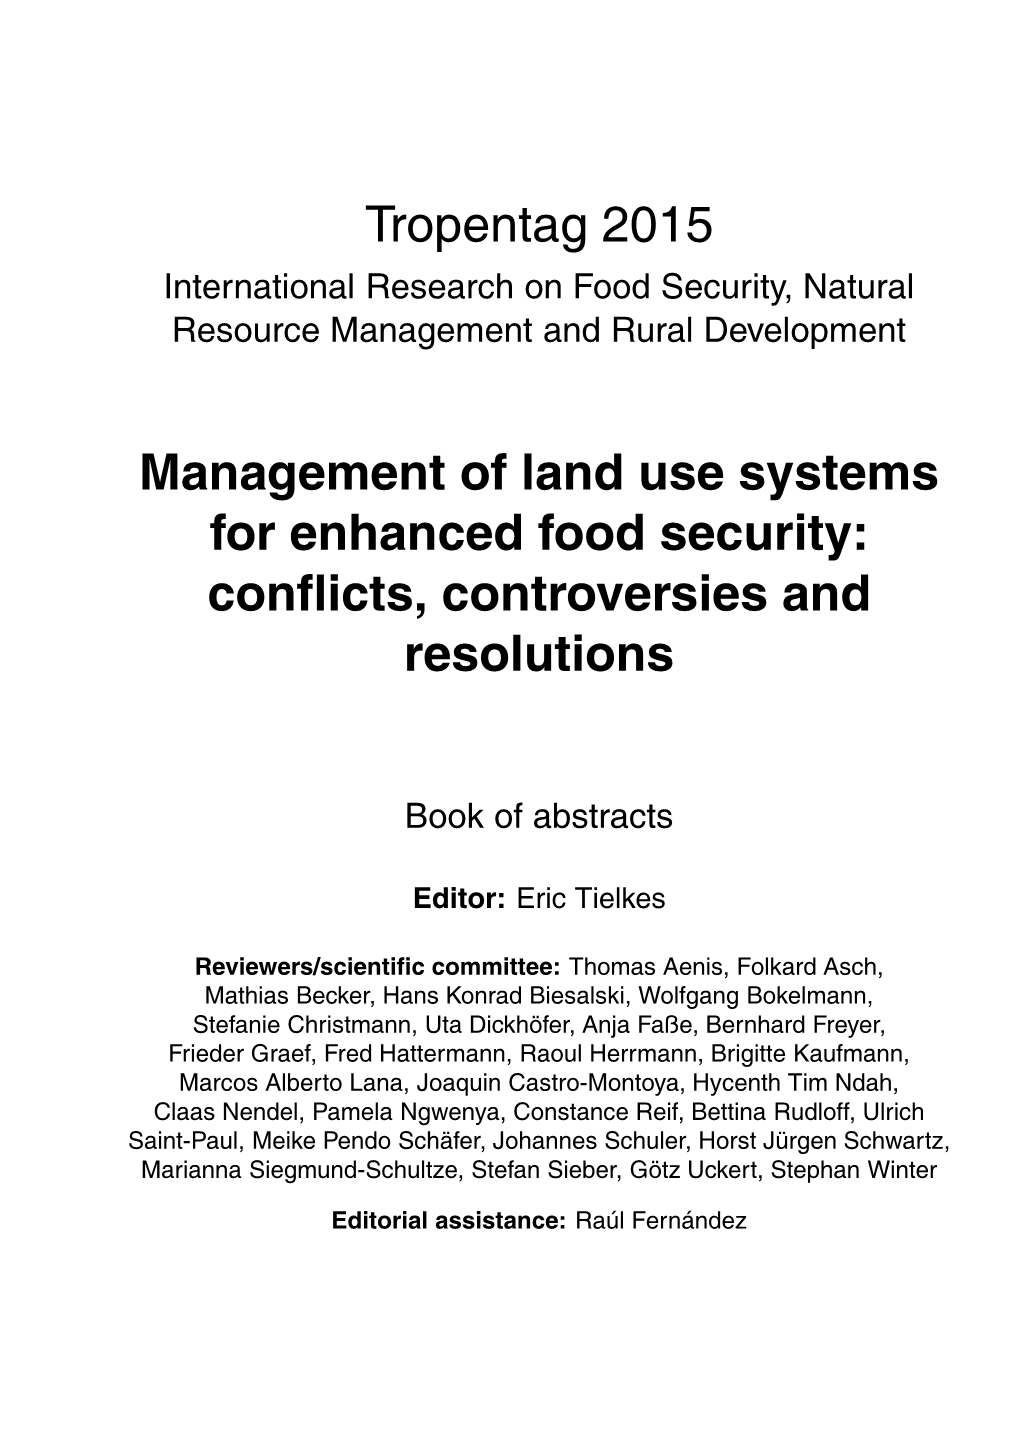 Tropentag 2015 Management of Land Use Systems for Enhanced Food